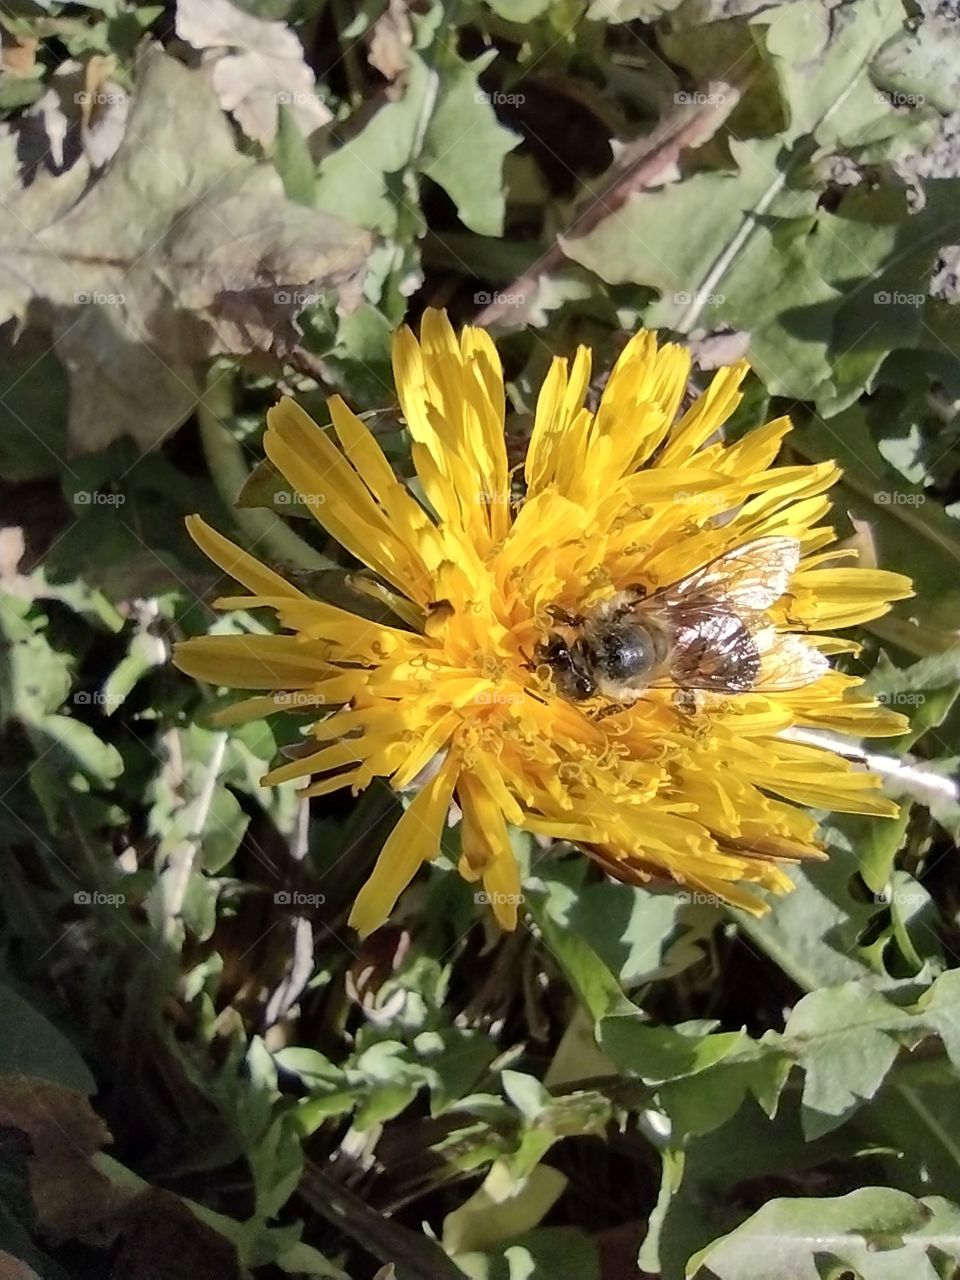 Unfiltered lovely bee on a Dandelion